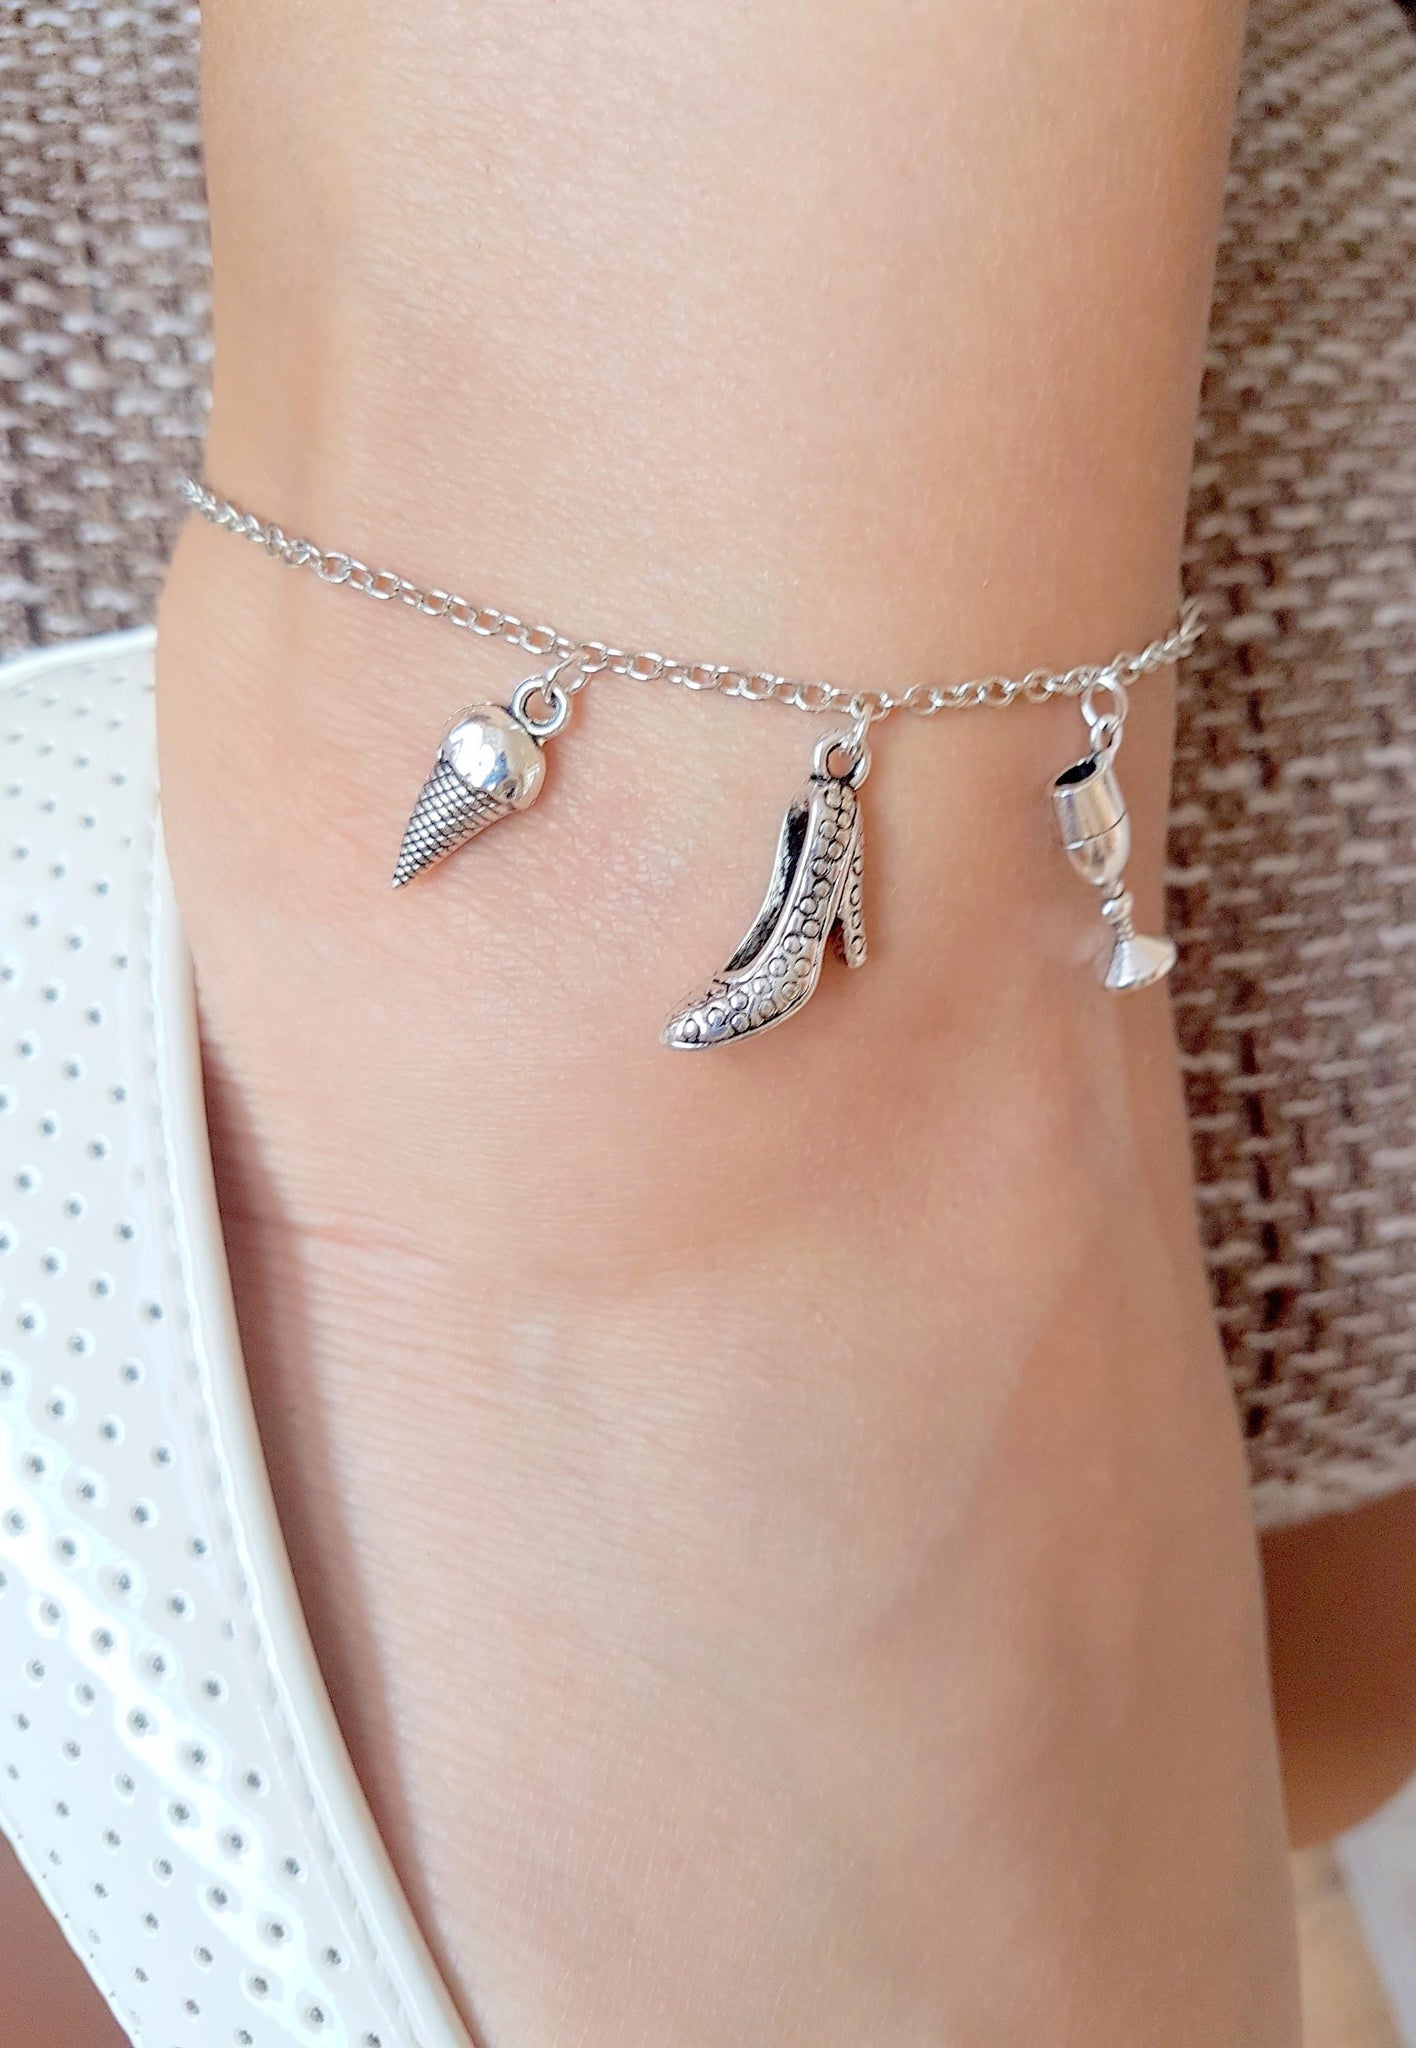 Barefoot jewelry, foot jewellery, shoe charm jewellery, icecream anklet bracelet, charm anklet bracelet, holiday party jewelry,silver anklet